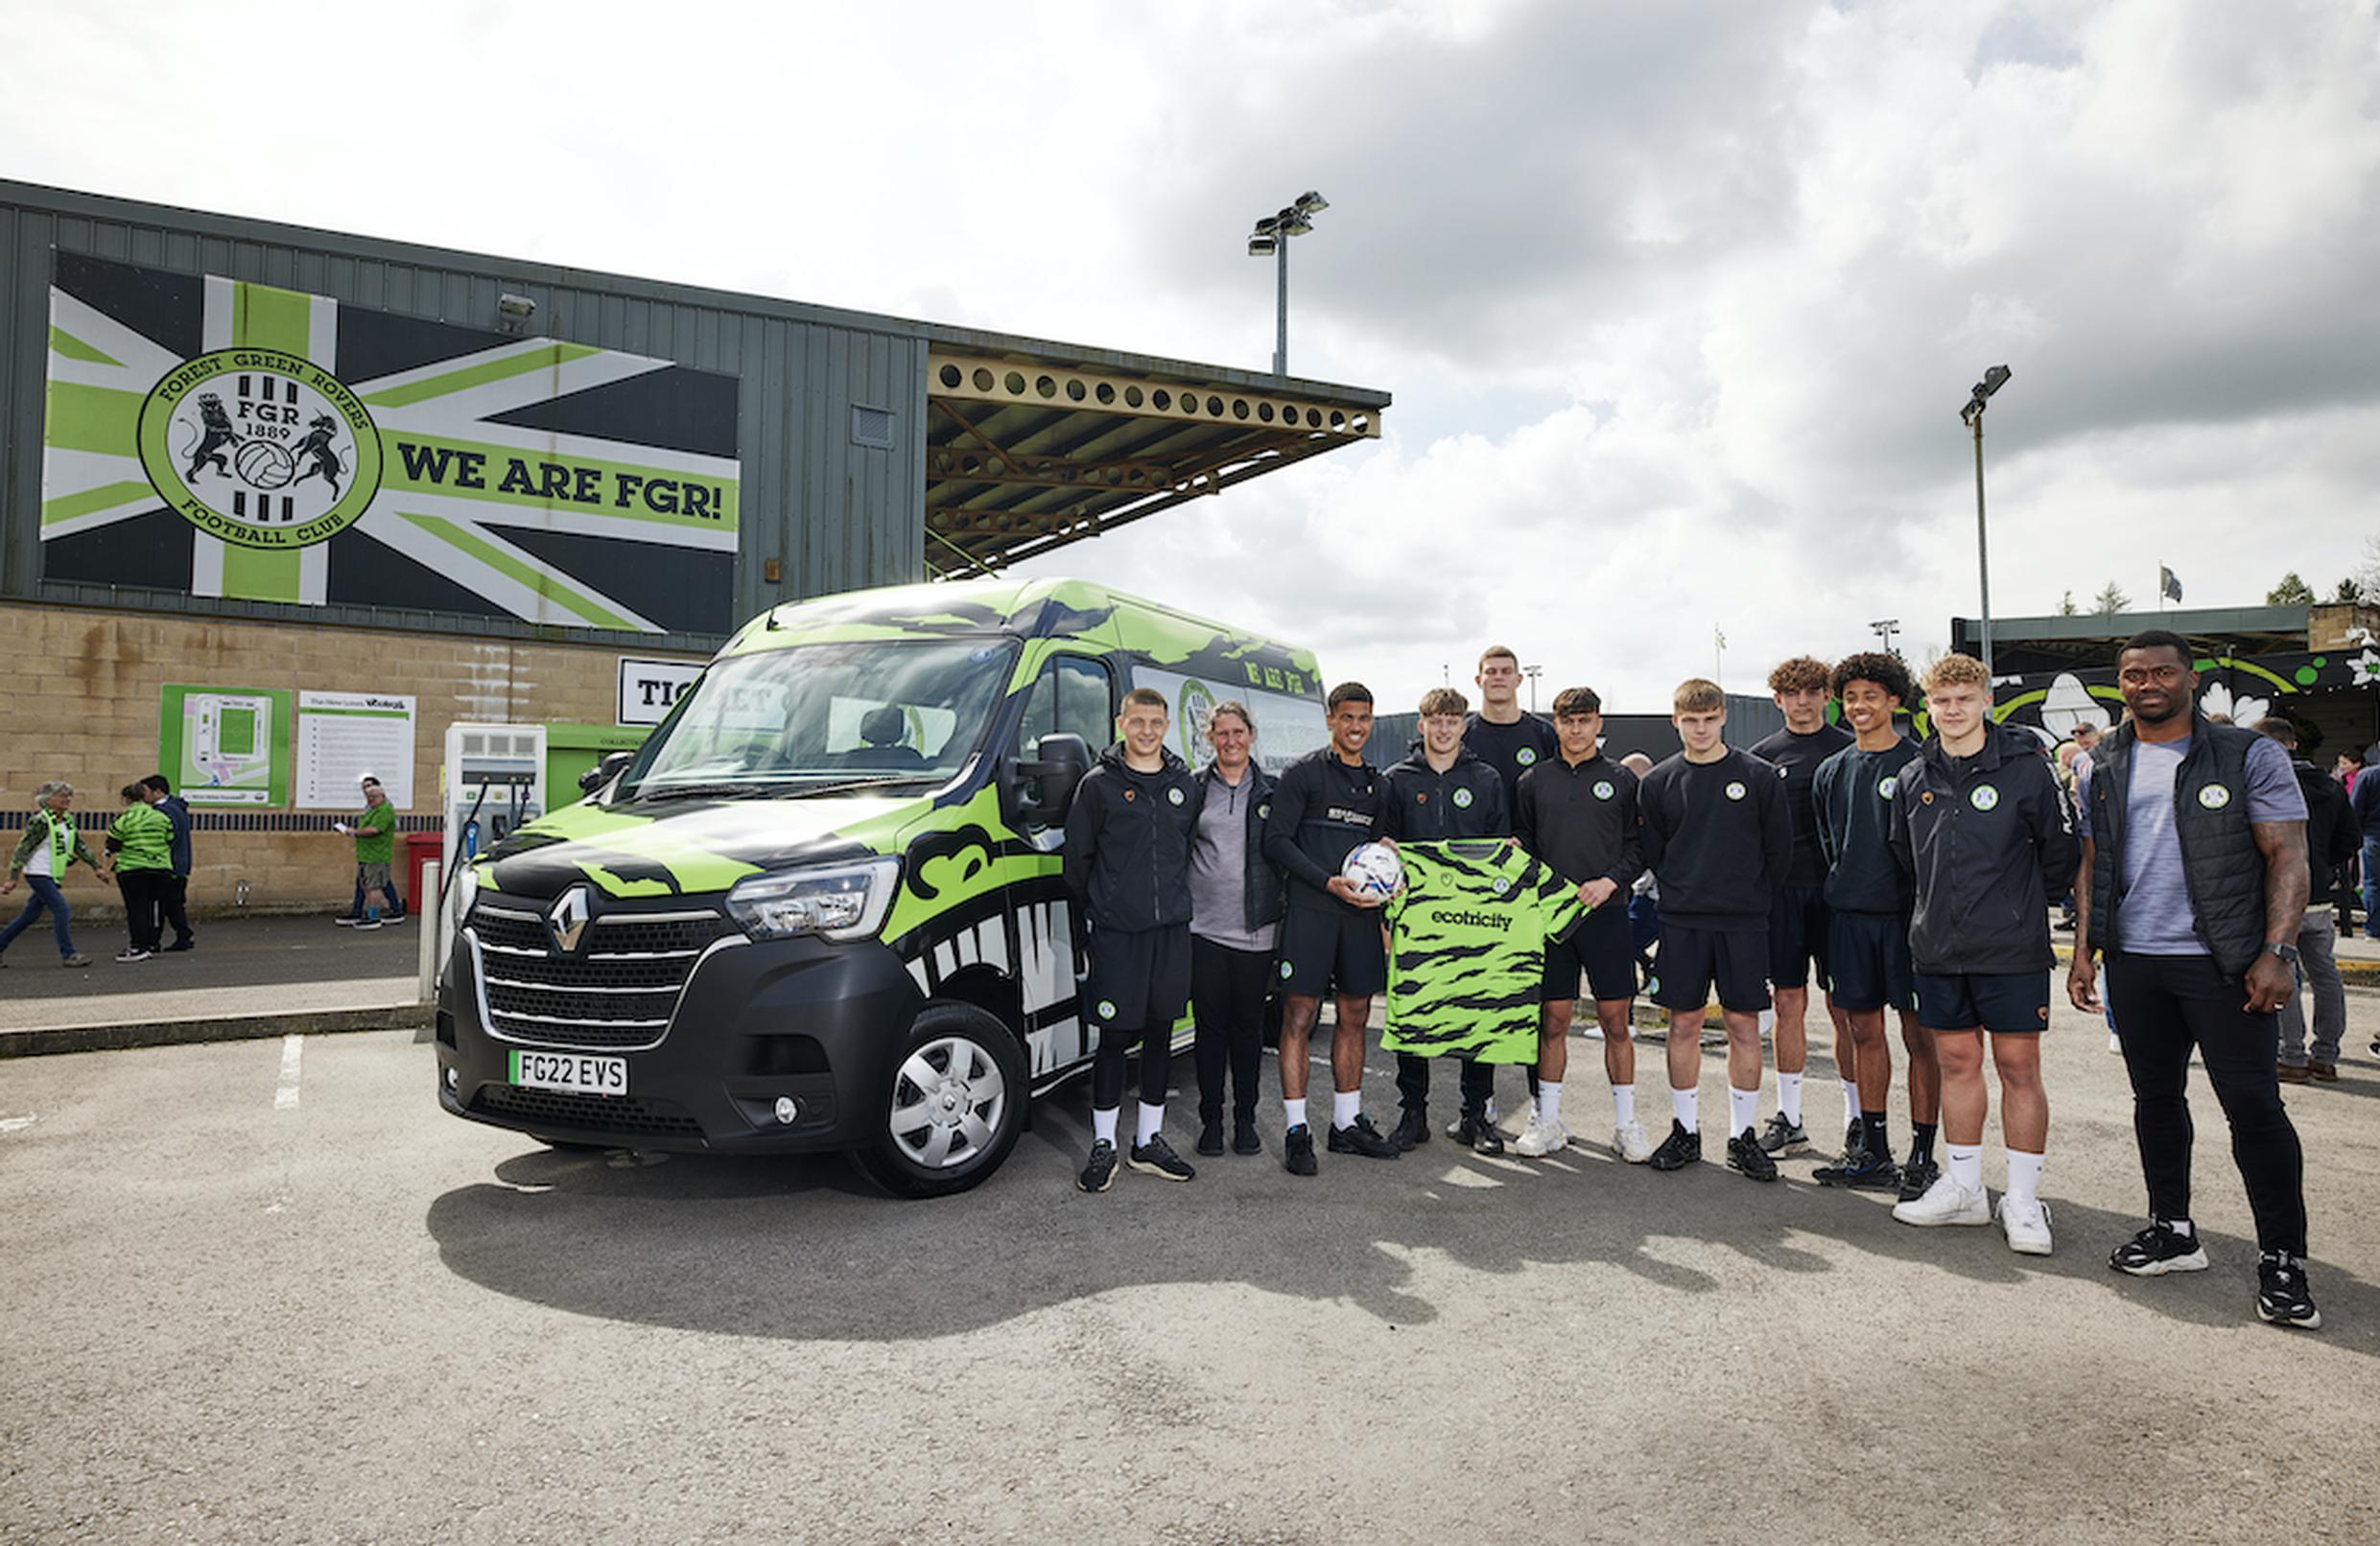 The new Forest Green team bus